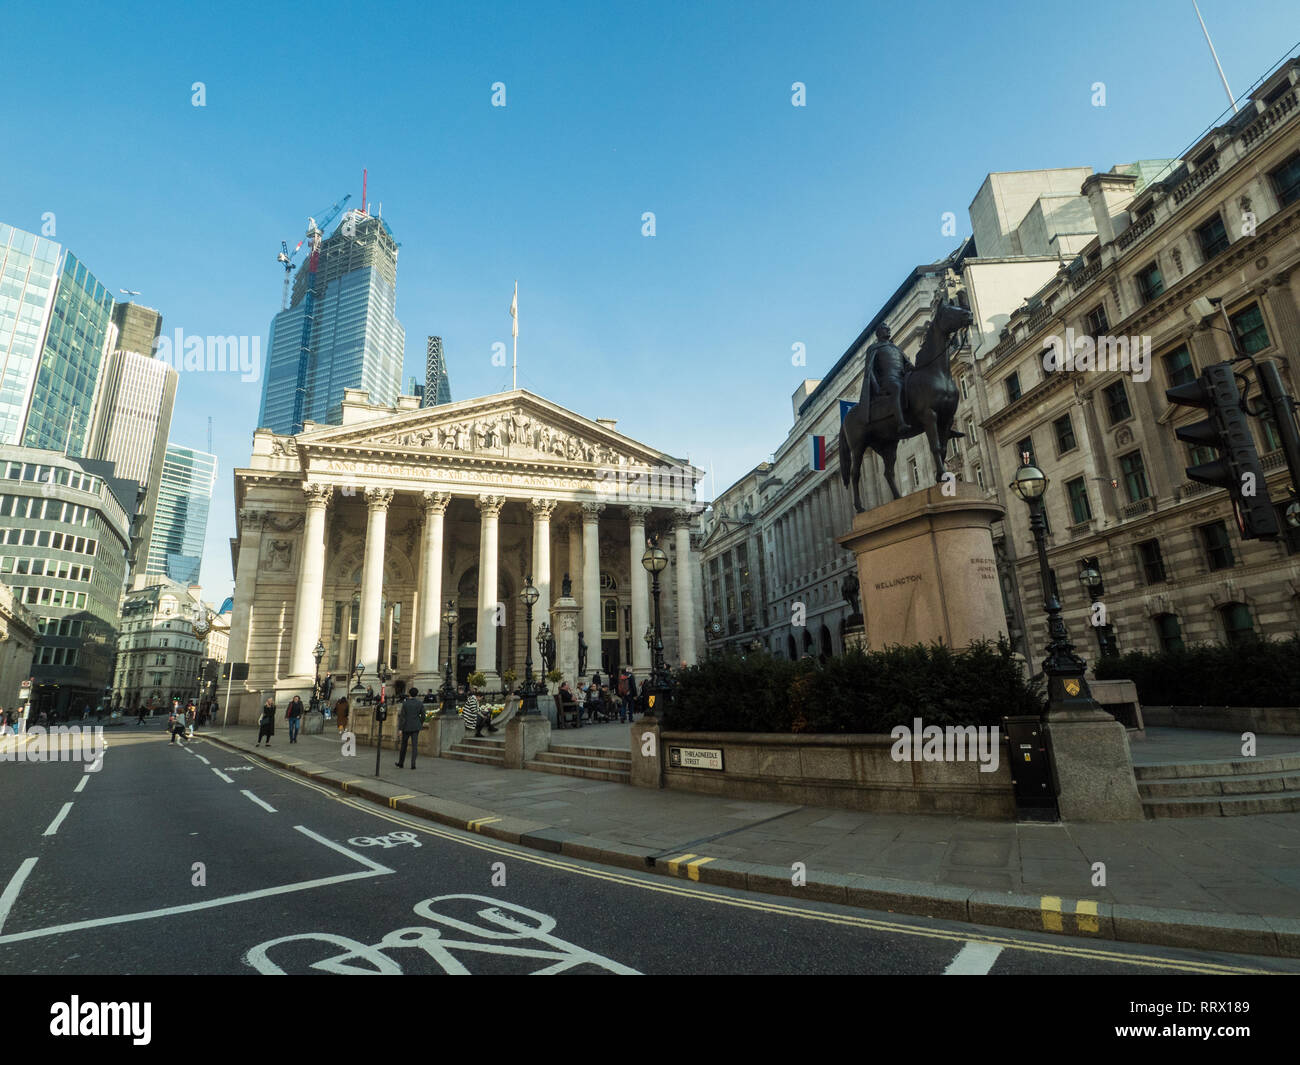 The Royal Exchange, now a boutique shopping centre, London, England. Stock Photo